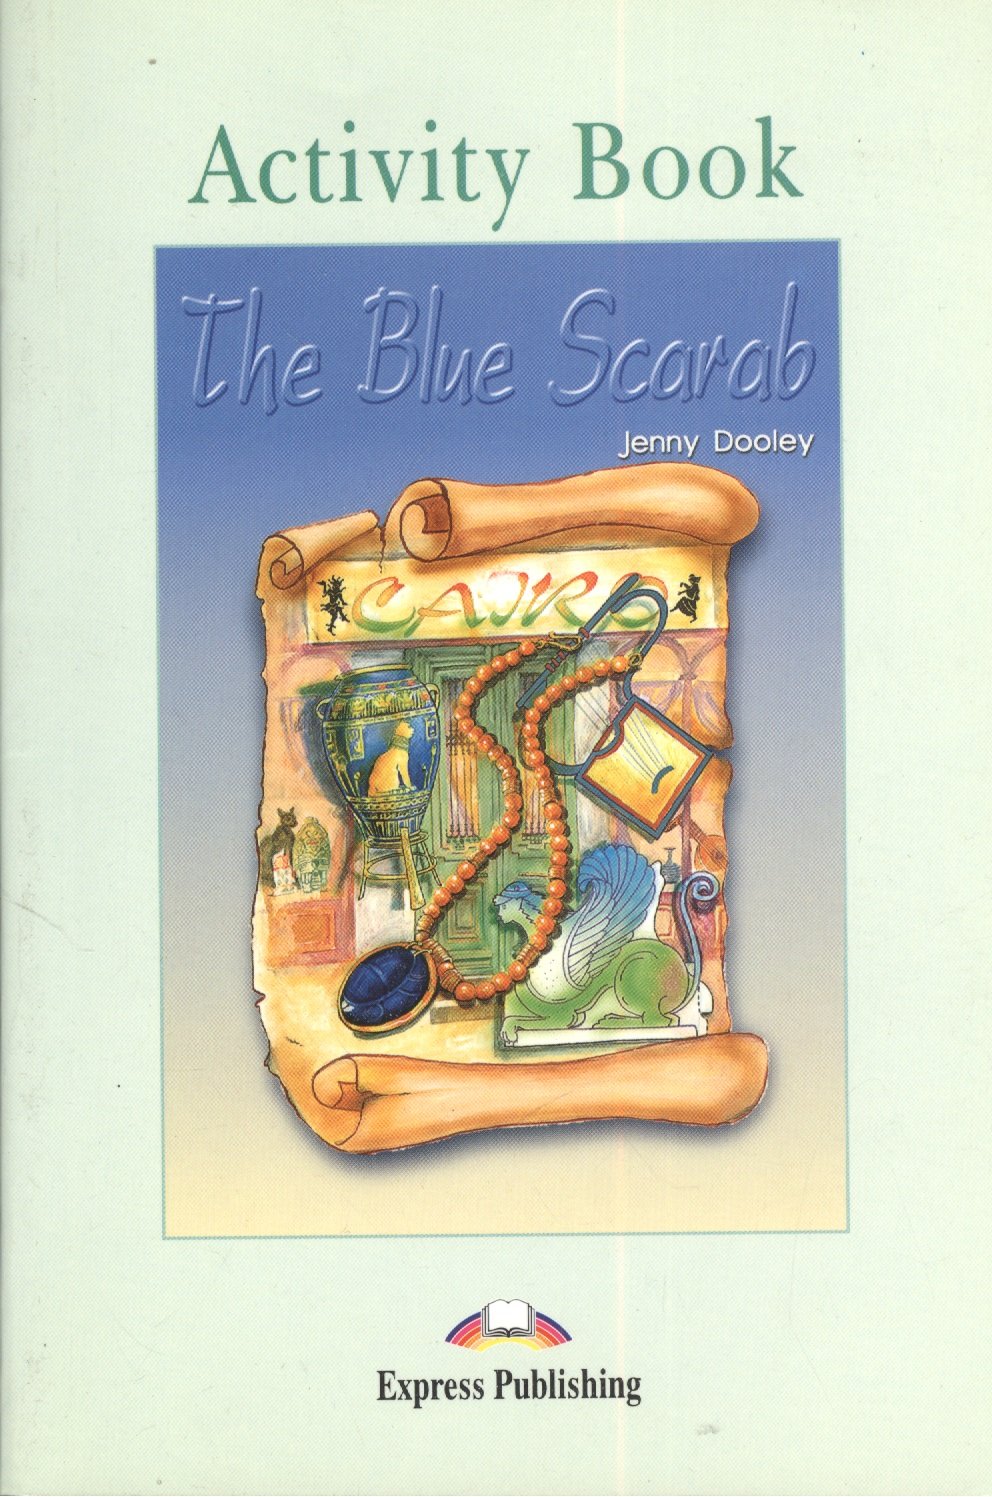 The Blue Scarab. Activity Book